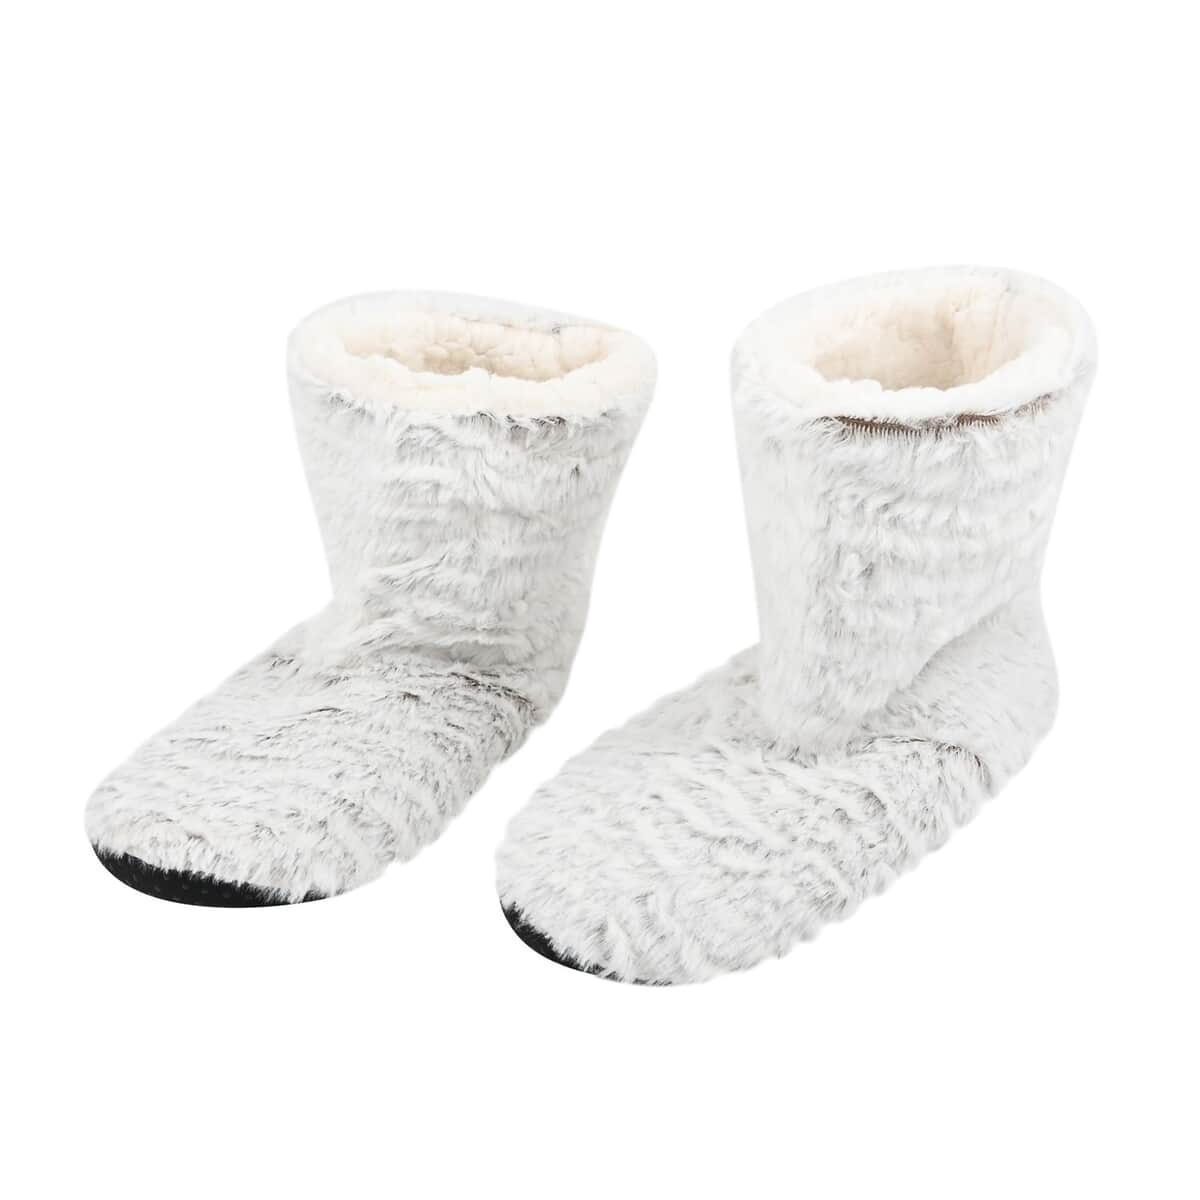 Homesmart Microfiber Faux Fur, Sherpa Booties and Matching Ballerina Slippers (Women's Size 5-10) image number 1